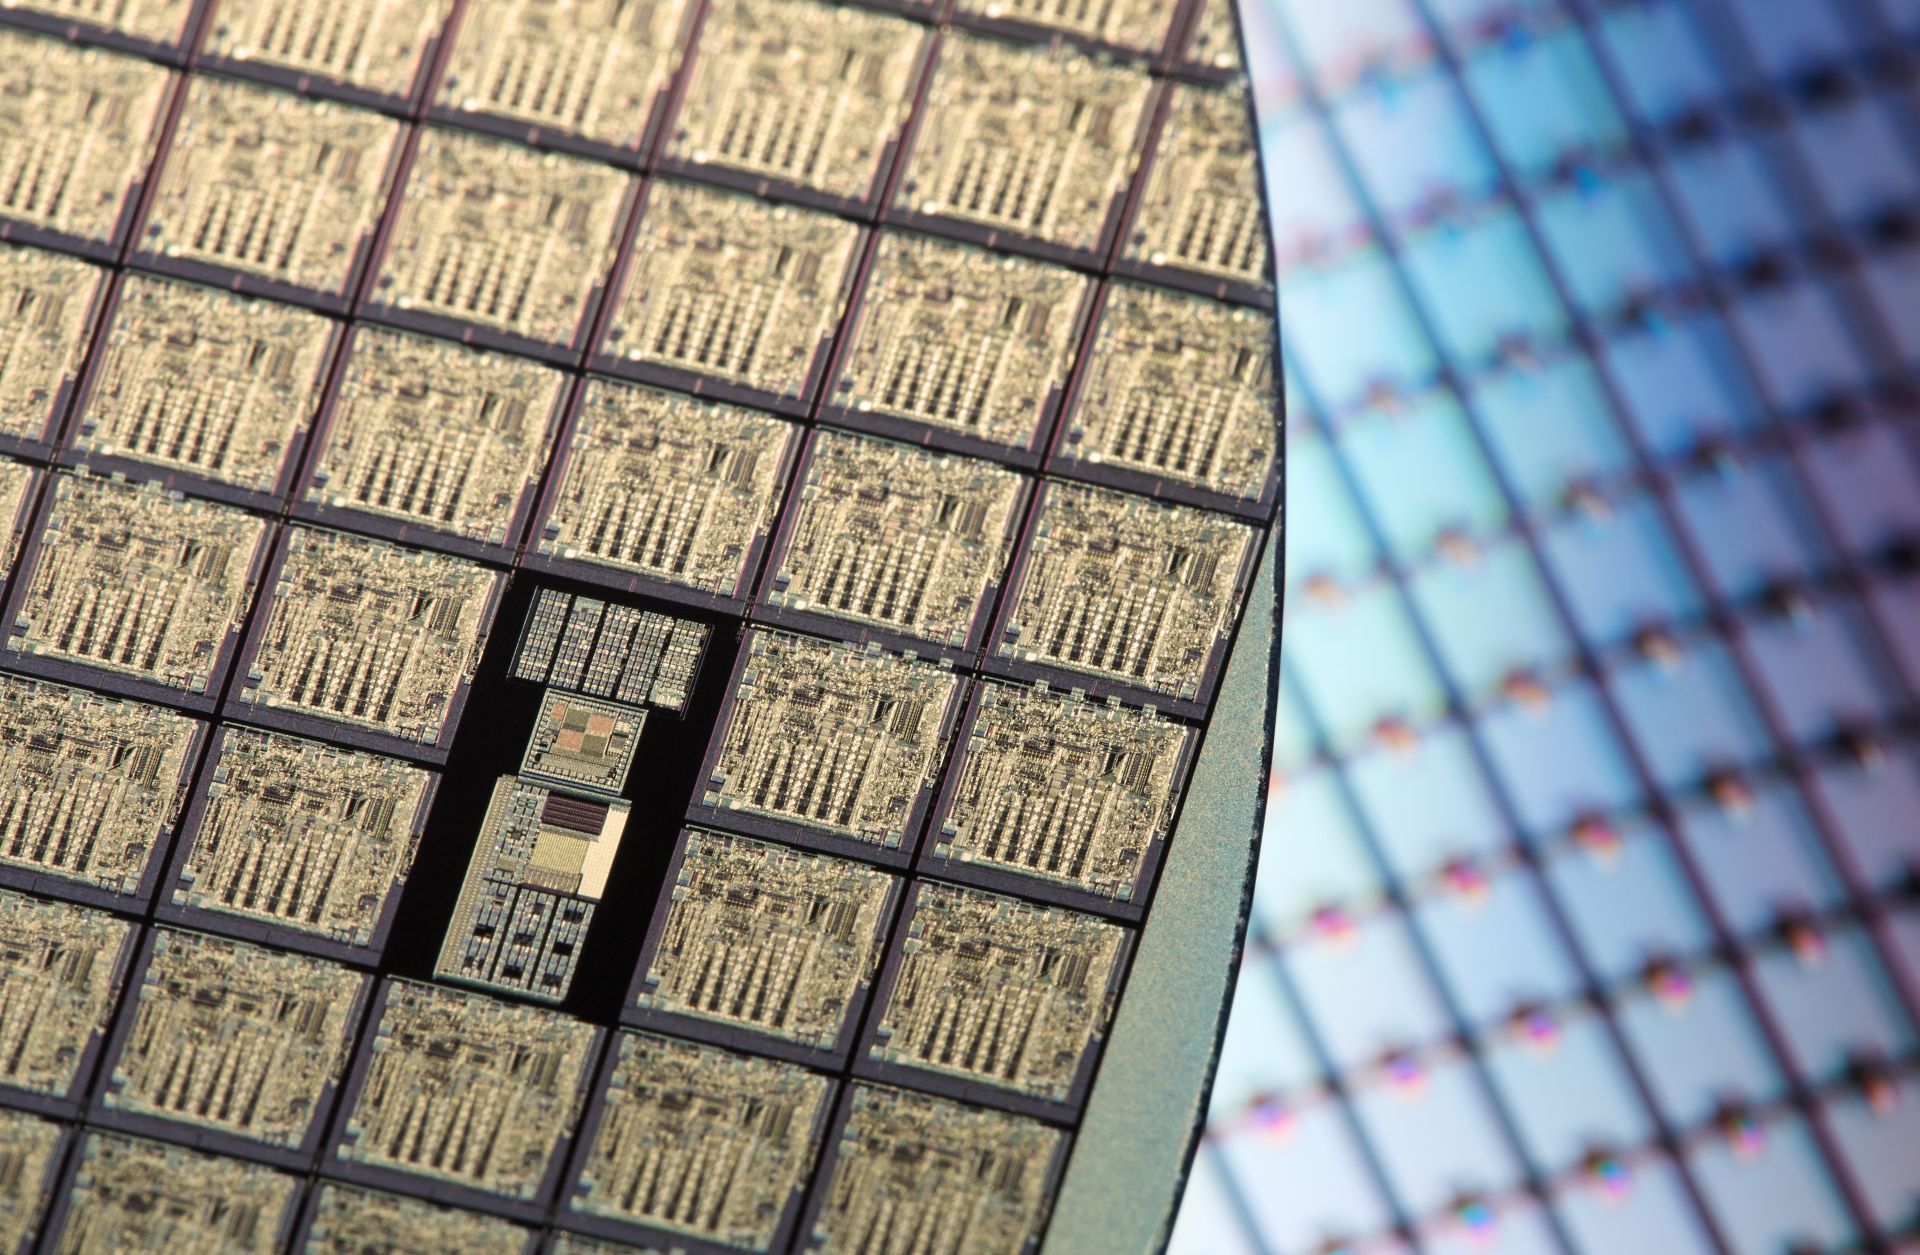 An image displays rows of silicon wafers.